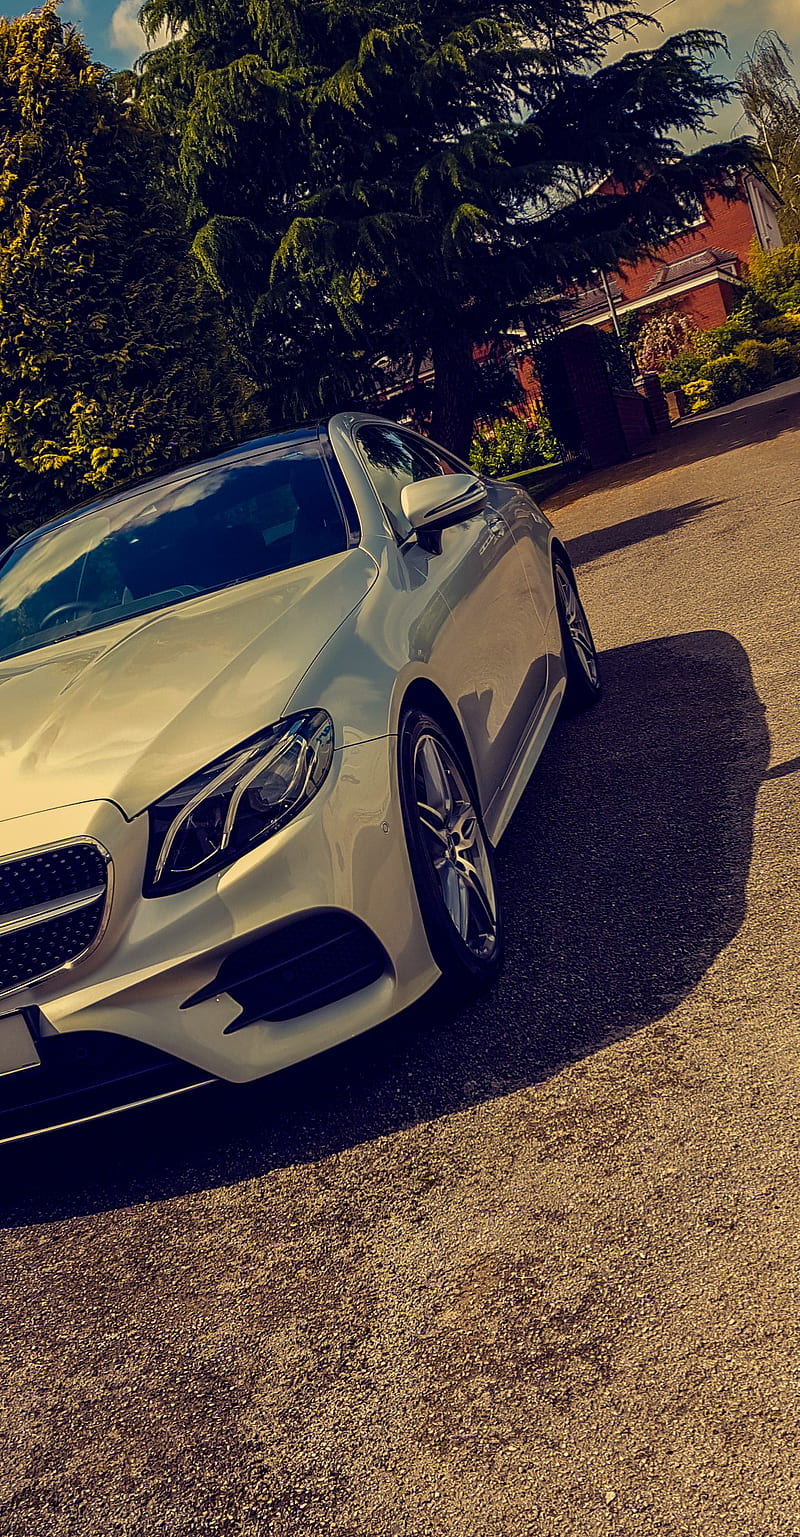 Mercedes, class, luxury, perfect, big house, lifestyle, culture, money, nice, sunny, HD phone wallpaper